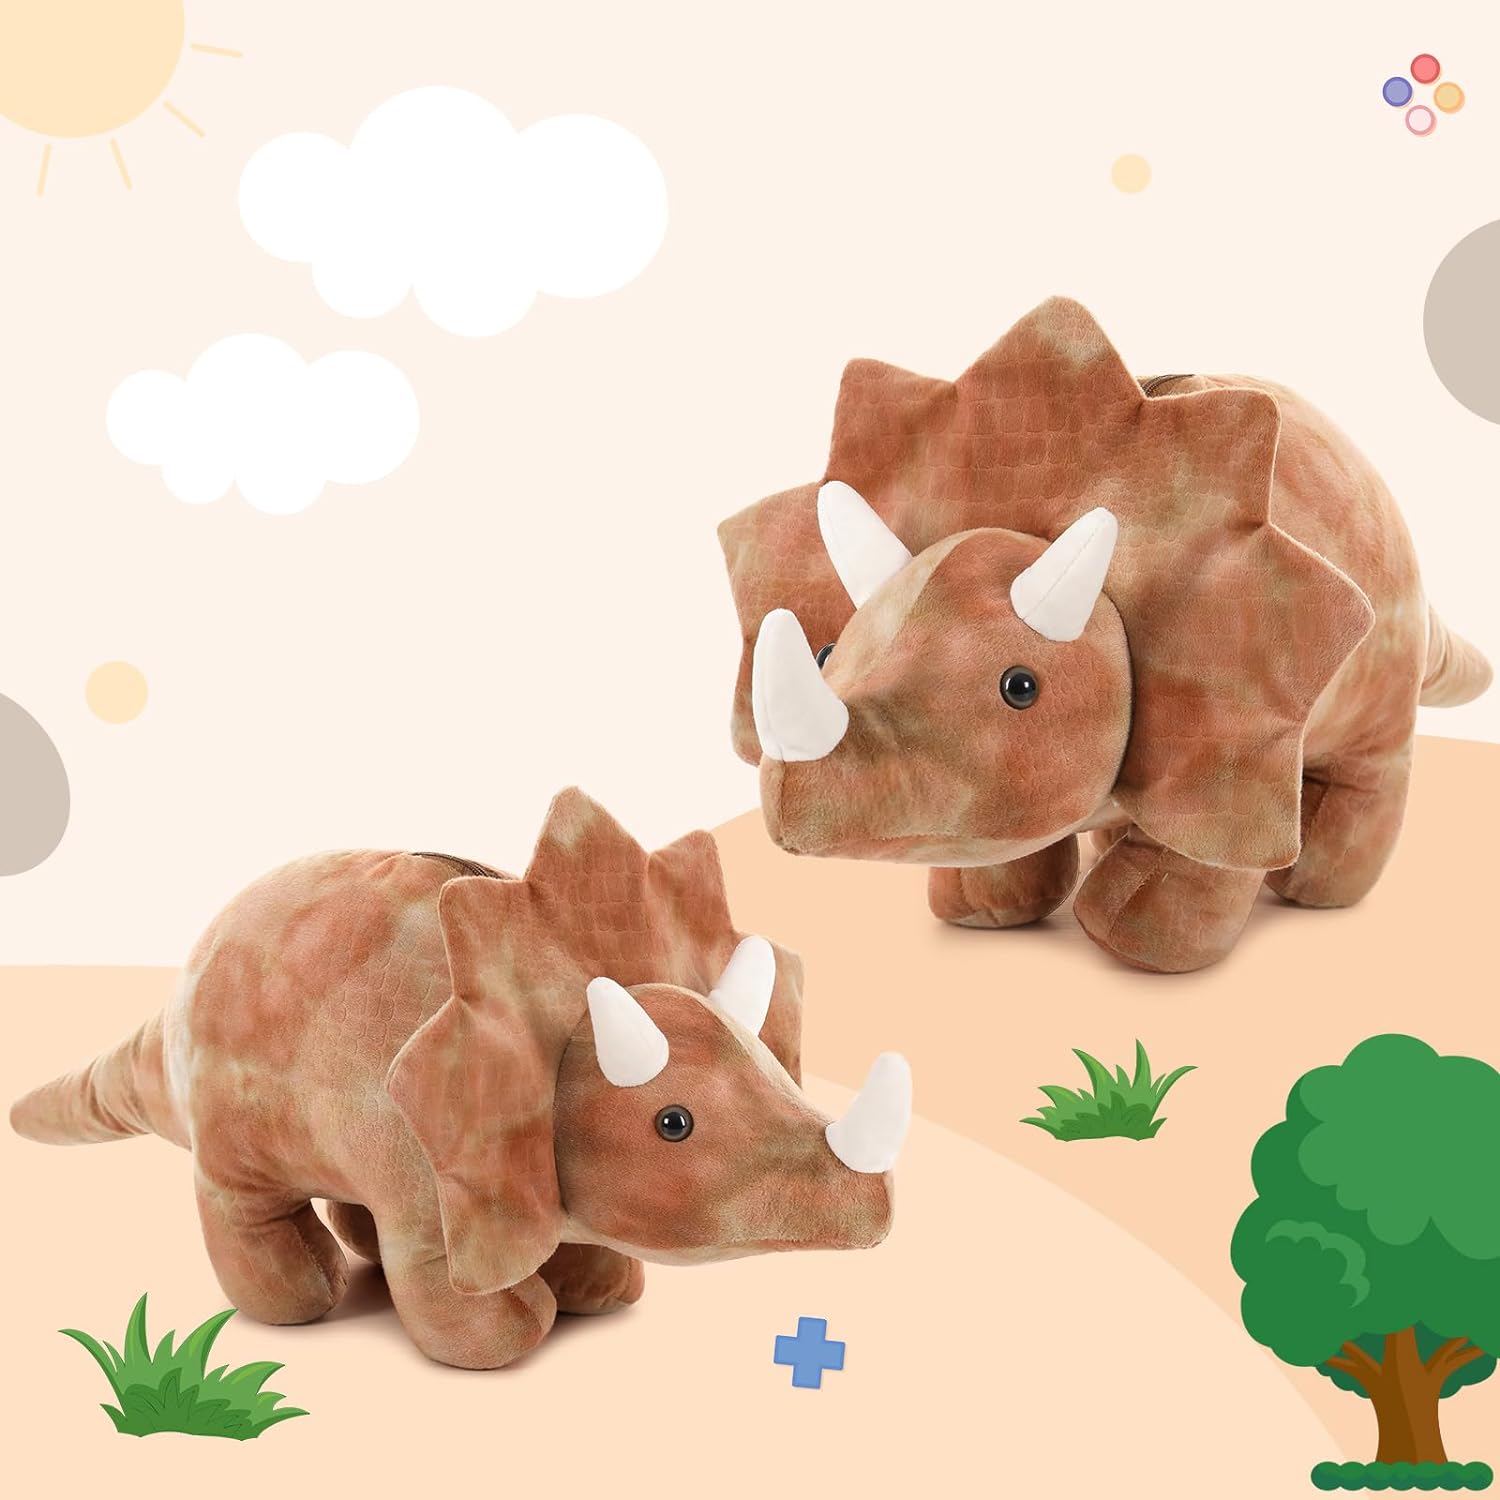 Dinosaur Plush Toy Triceratops Stuffed Toy, 24.5/31.5 Inches